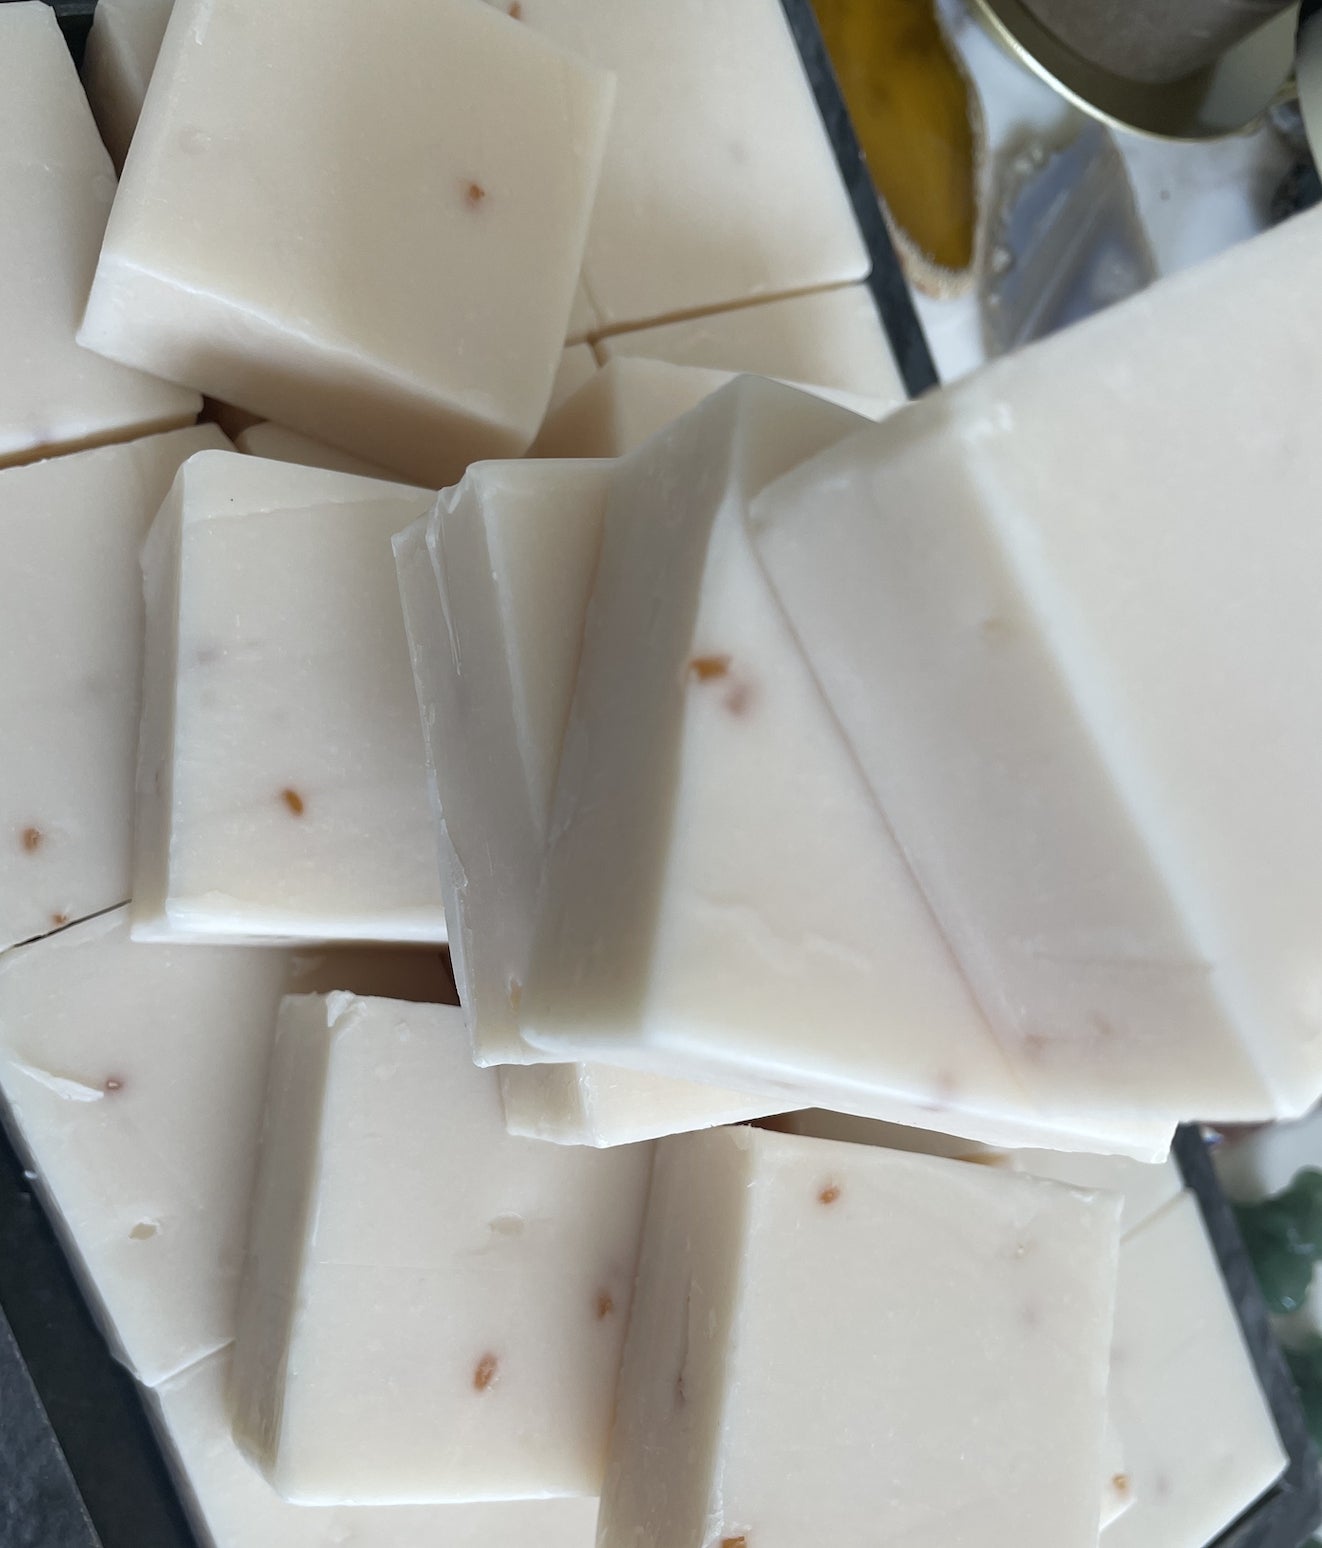 Handmade - Herbal Rice Milk Soap Collagen Moisturizing, Herbal Natural Milk Soap - Personal Hour for Yoga and Meditations 